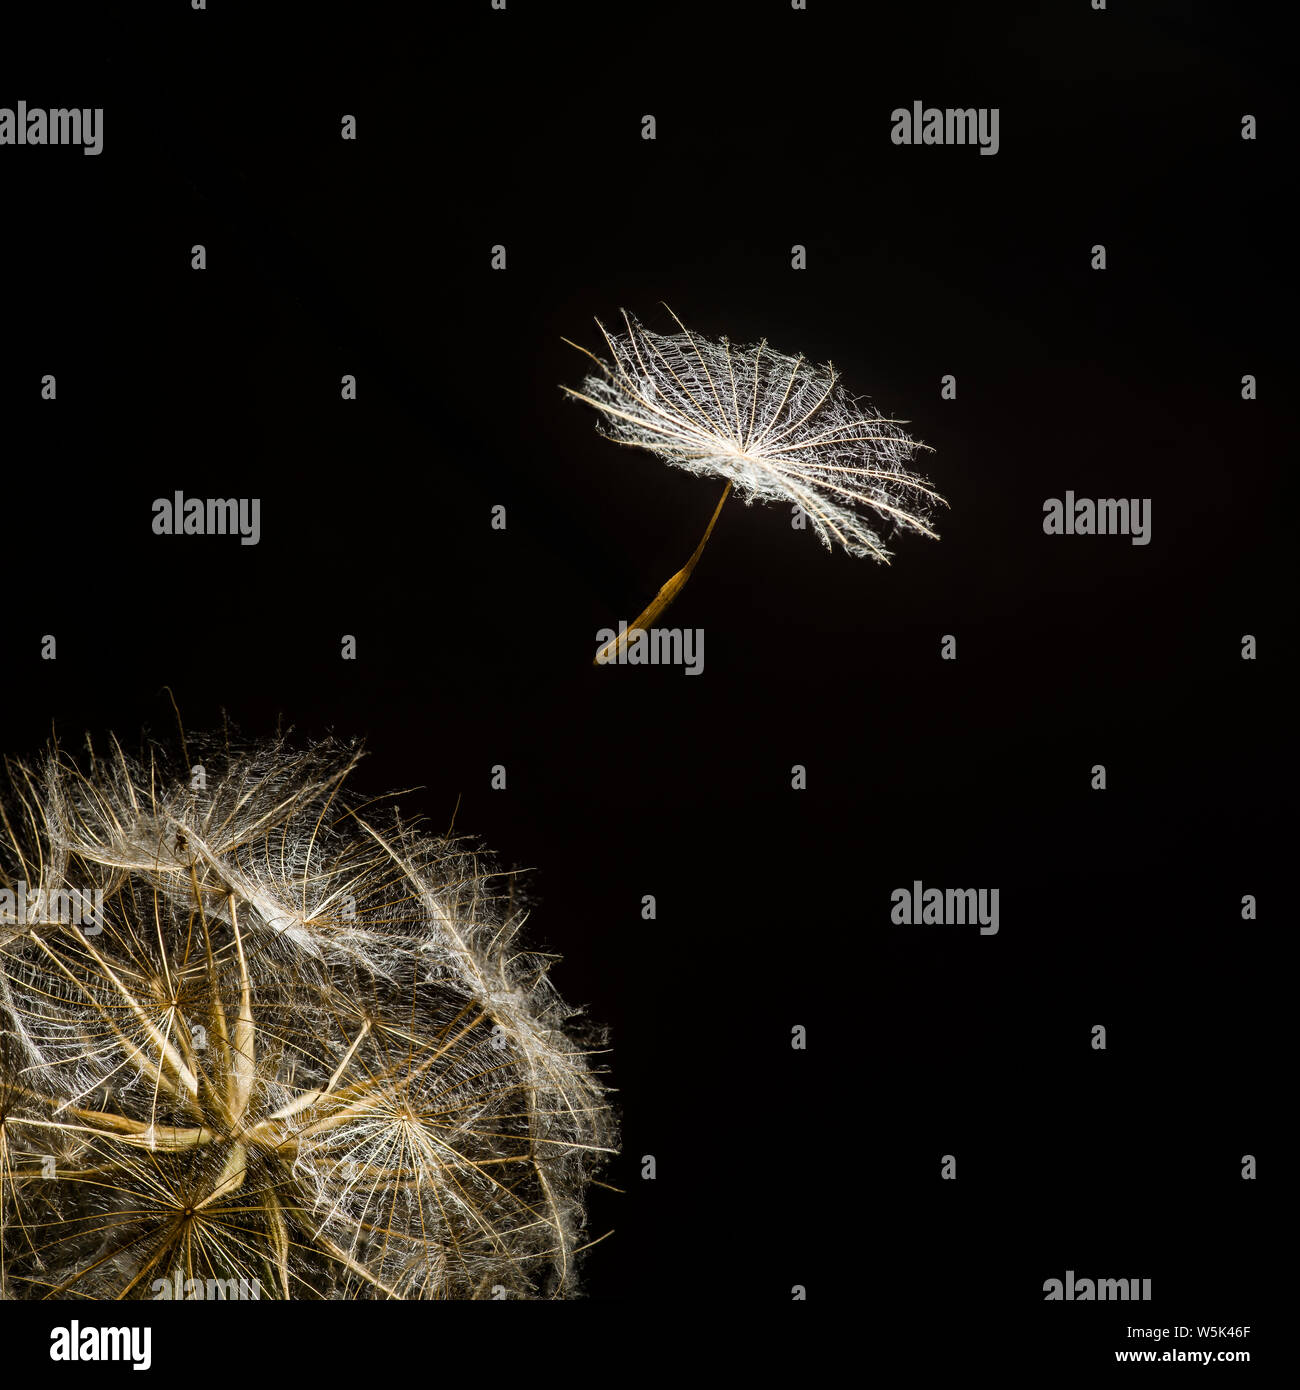 Umbelliferous seed of Meadow Salsify (Tragopogon pratensis) flying away from the seed head against a black background. Stock Photo